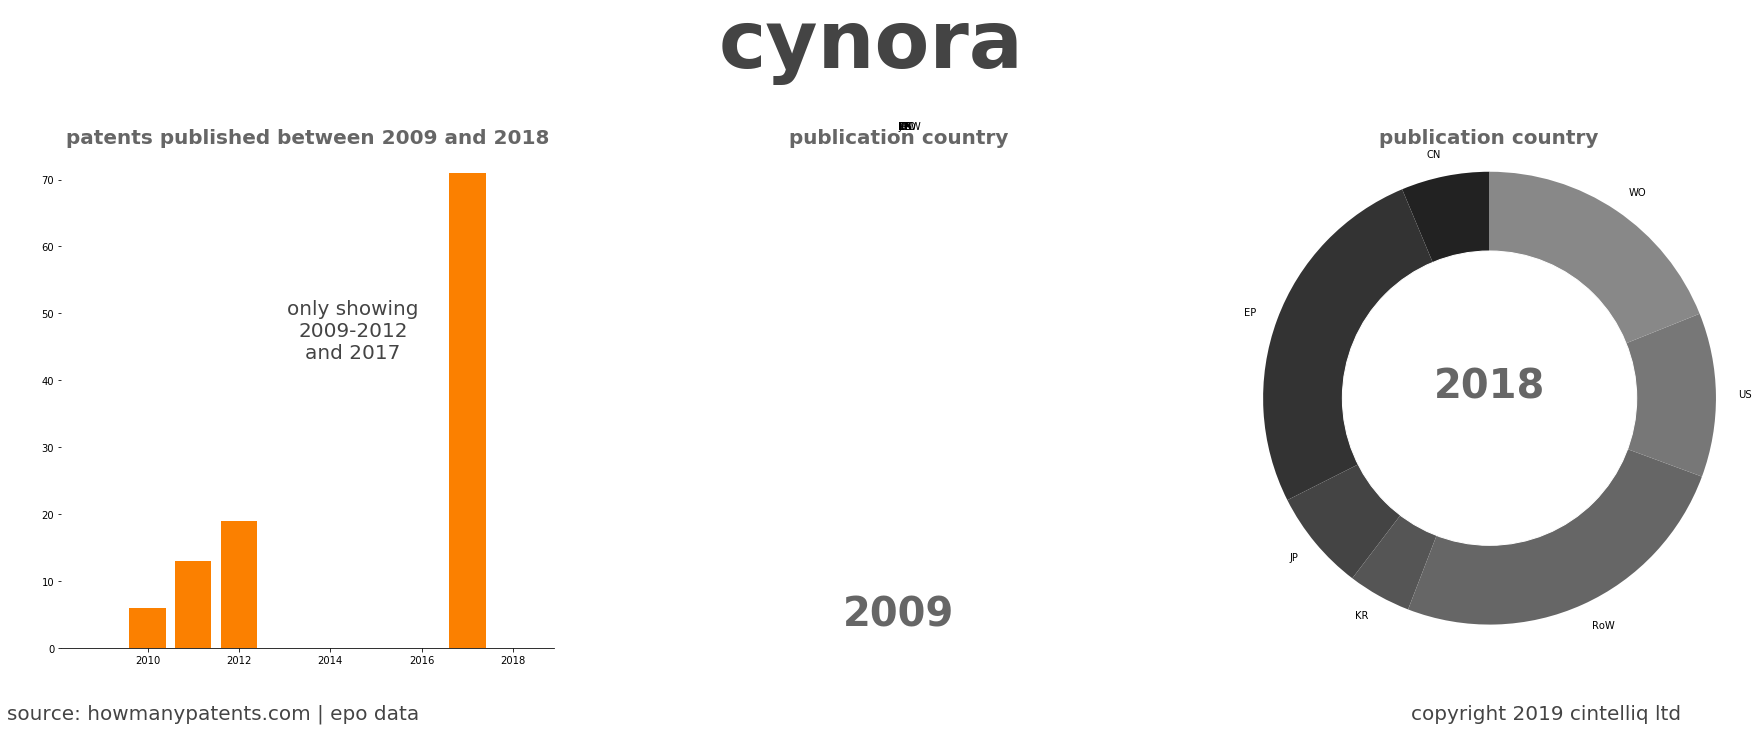 summary of patents for Cynora